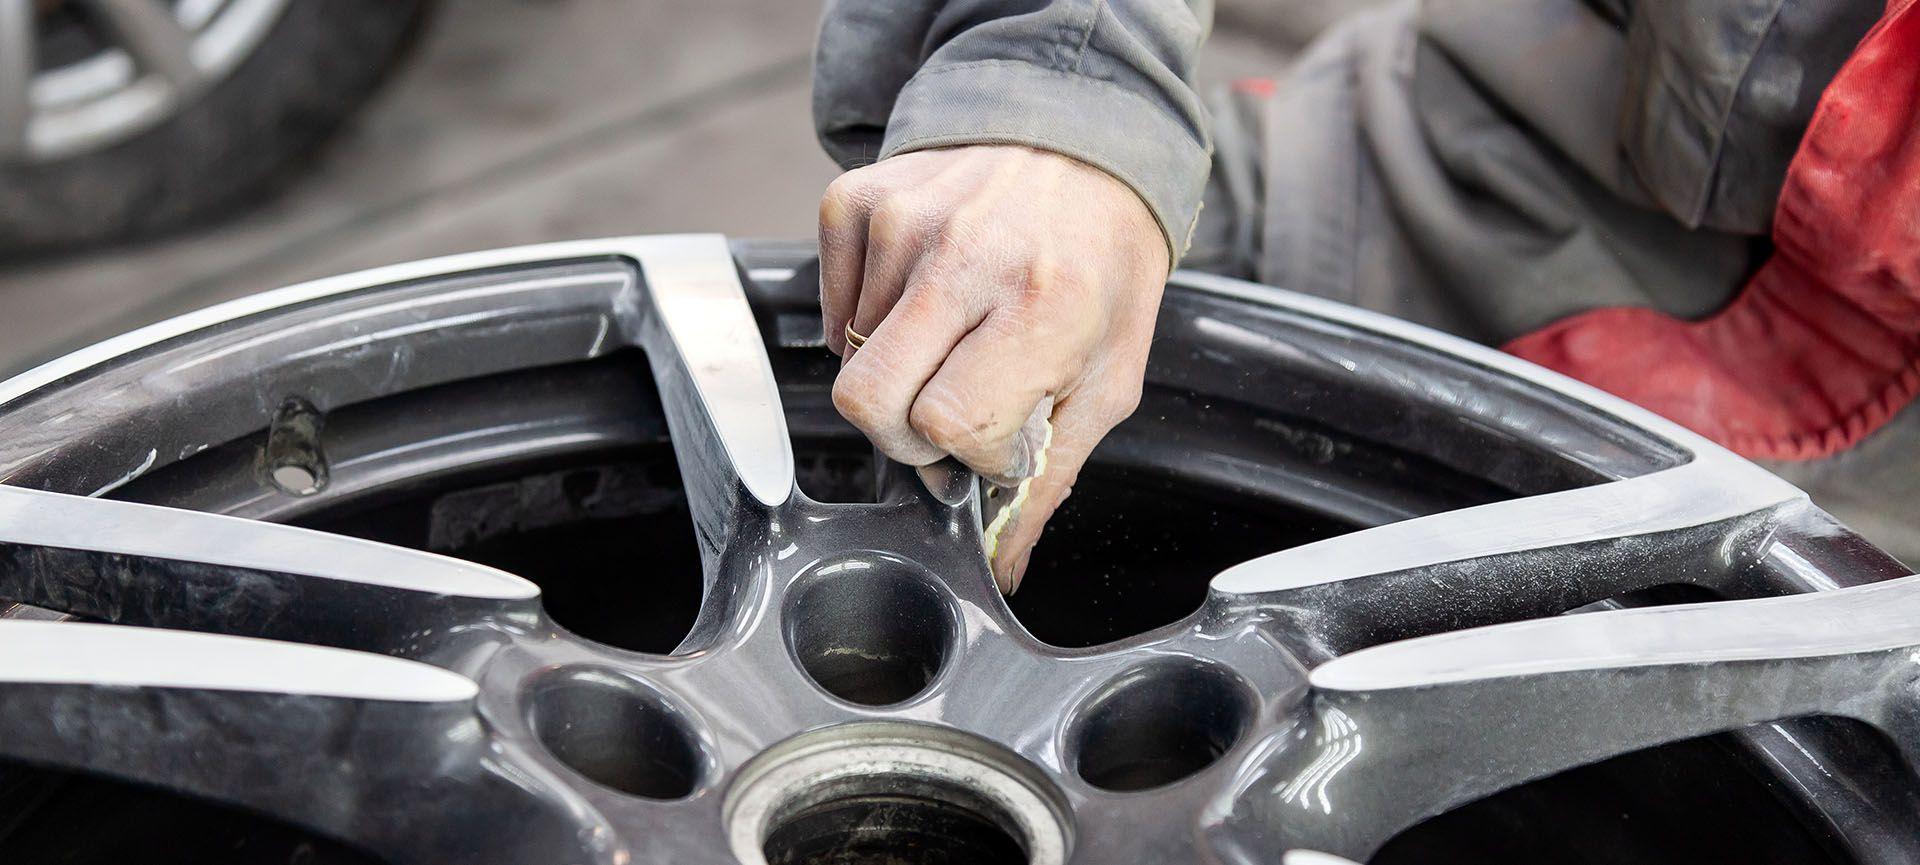 How Much Does Wheel Repair Cost & What Factors Affect the Price?